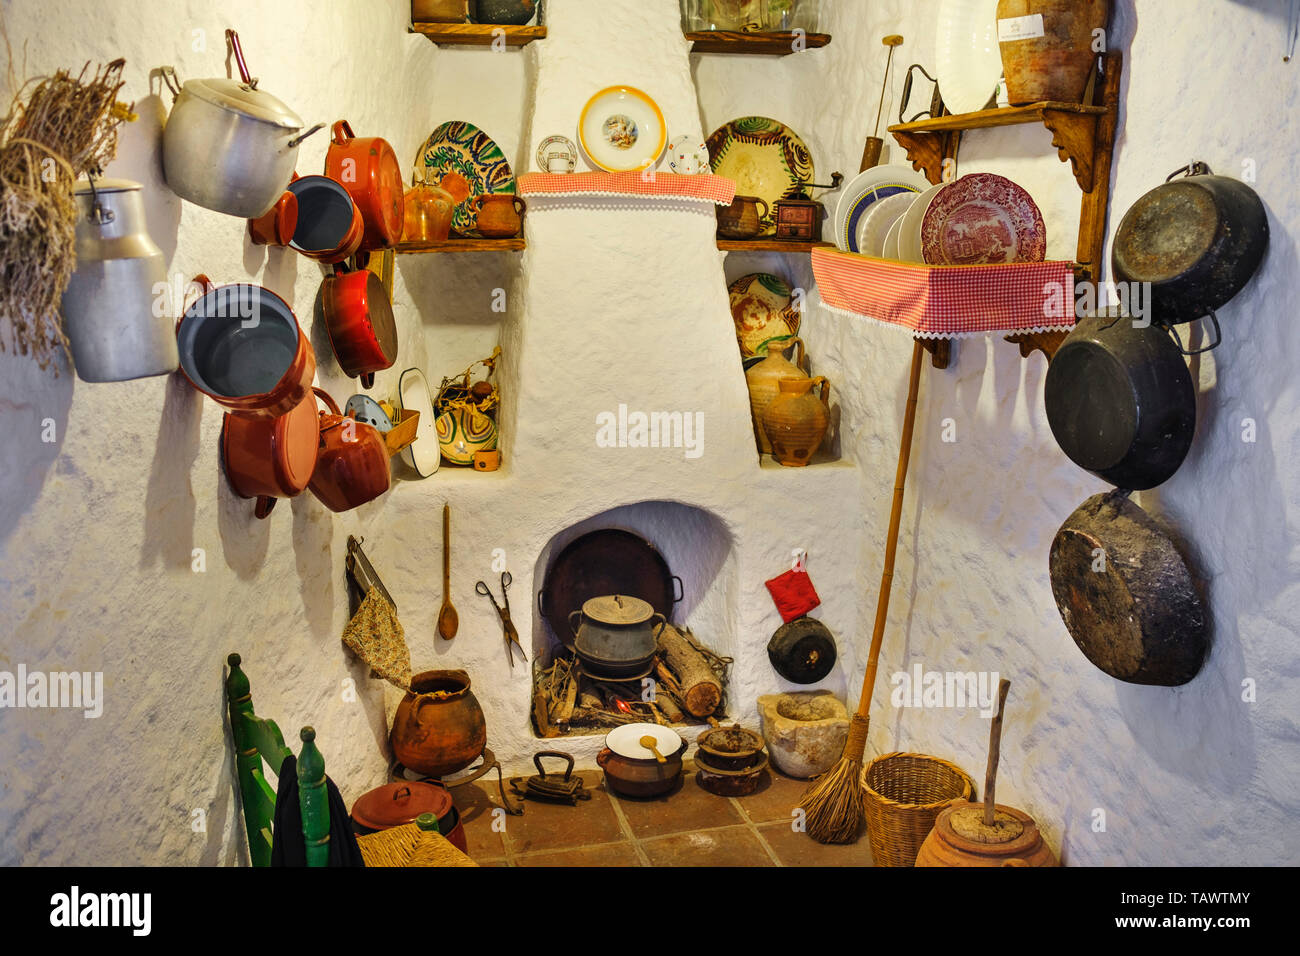 Typical traditional Andalusian kitchen. Casa Ethnographic Museum, Mijas Pueblo. Malaga province, Costa del Sol. Andalusia, Spain Europe Stock Photo